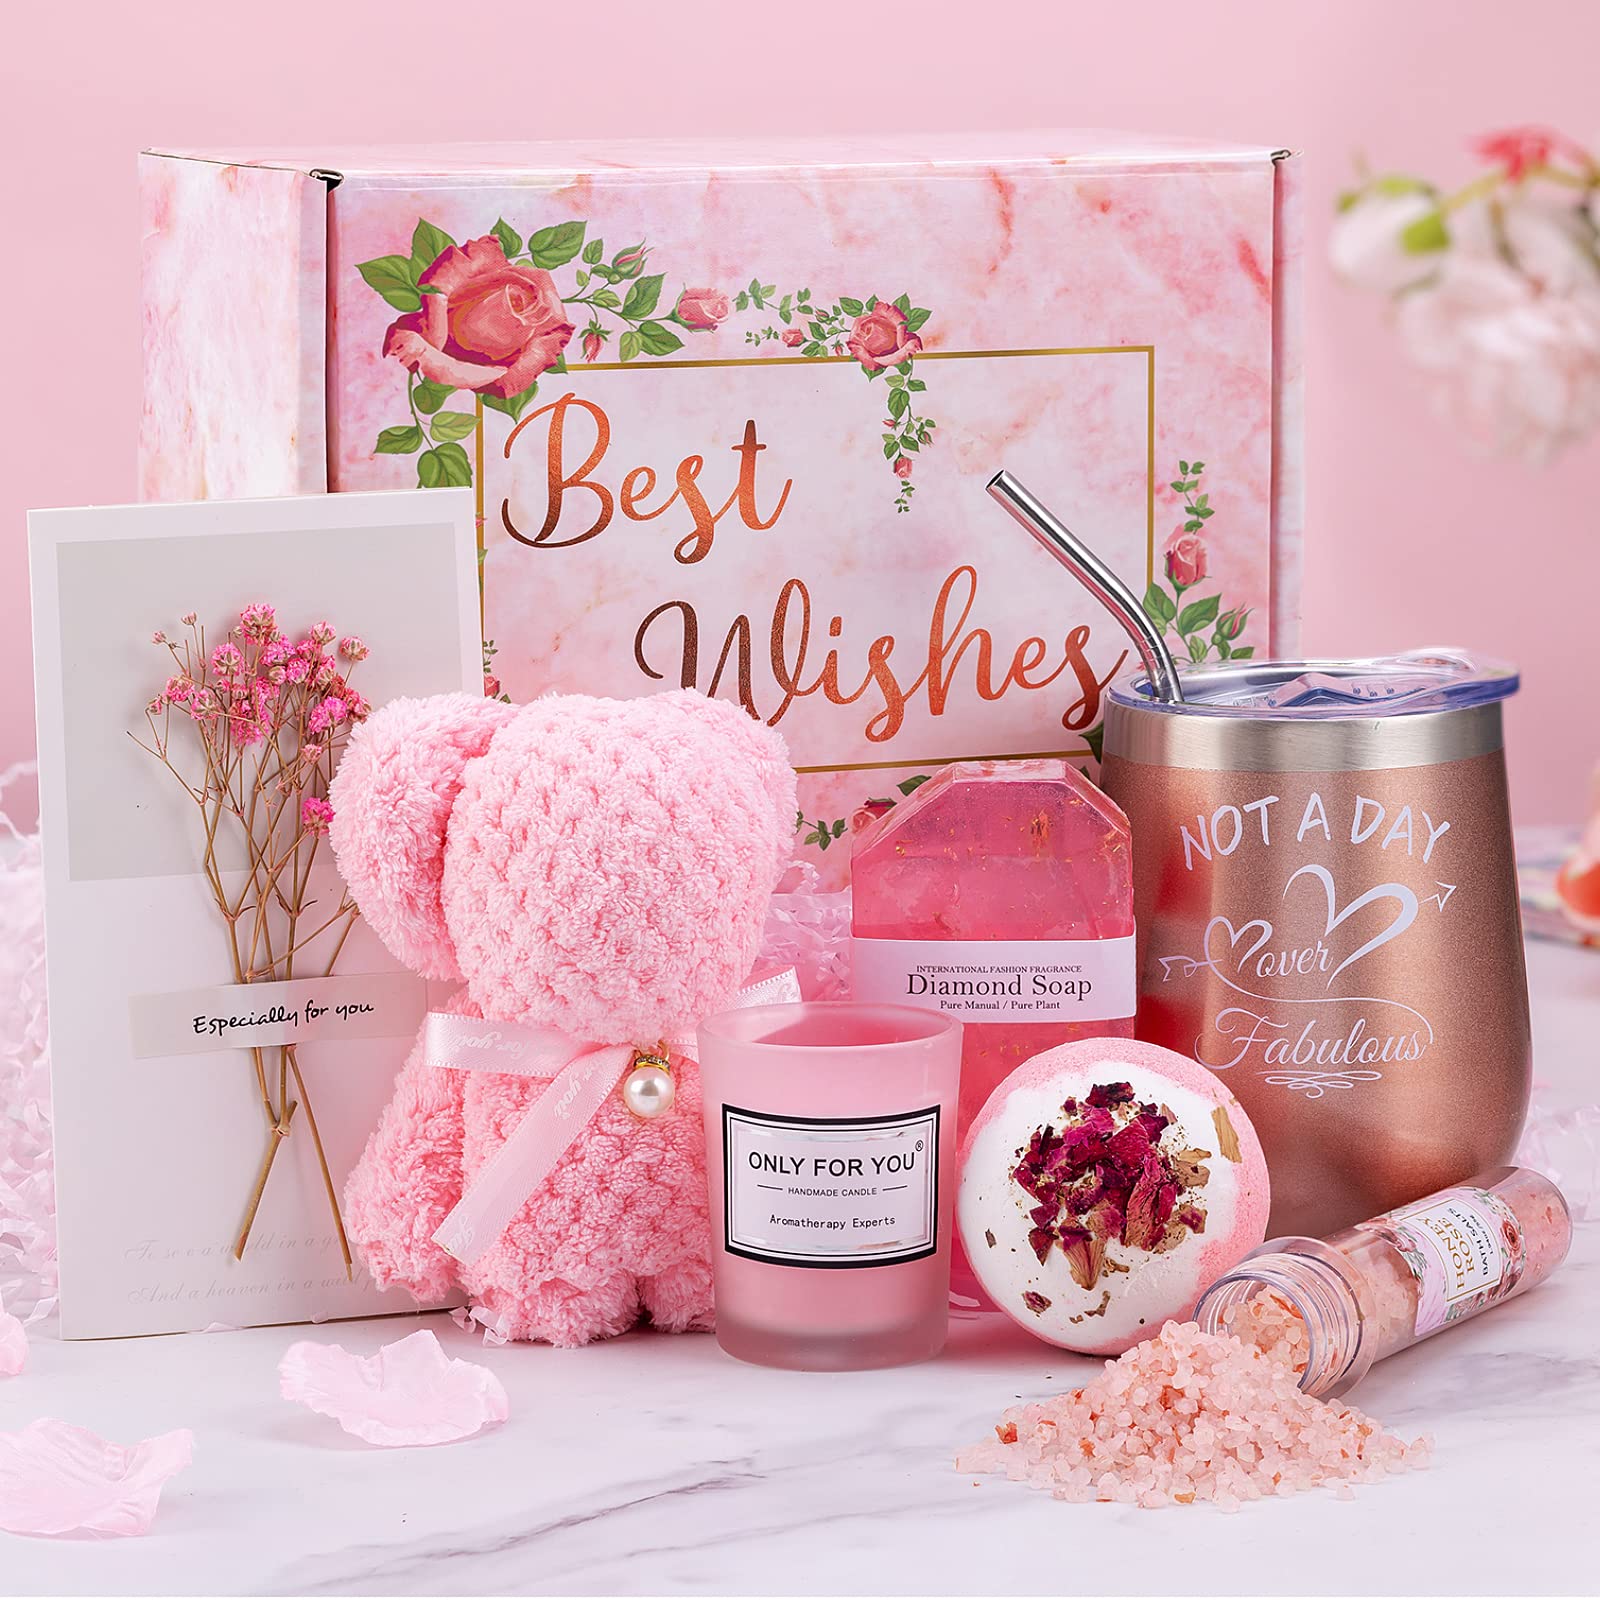 Birthday Gifts for Women,Happy Bath Set Relaxing Spa Gift Baskets Ideas  Her, Mom, Sister, Female Friends, Coworker, Wife, Girlfriend, Daughter,  Unique